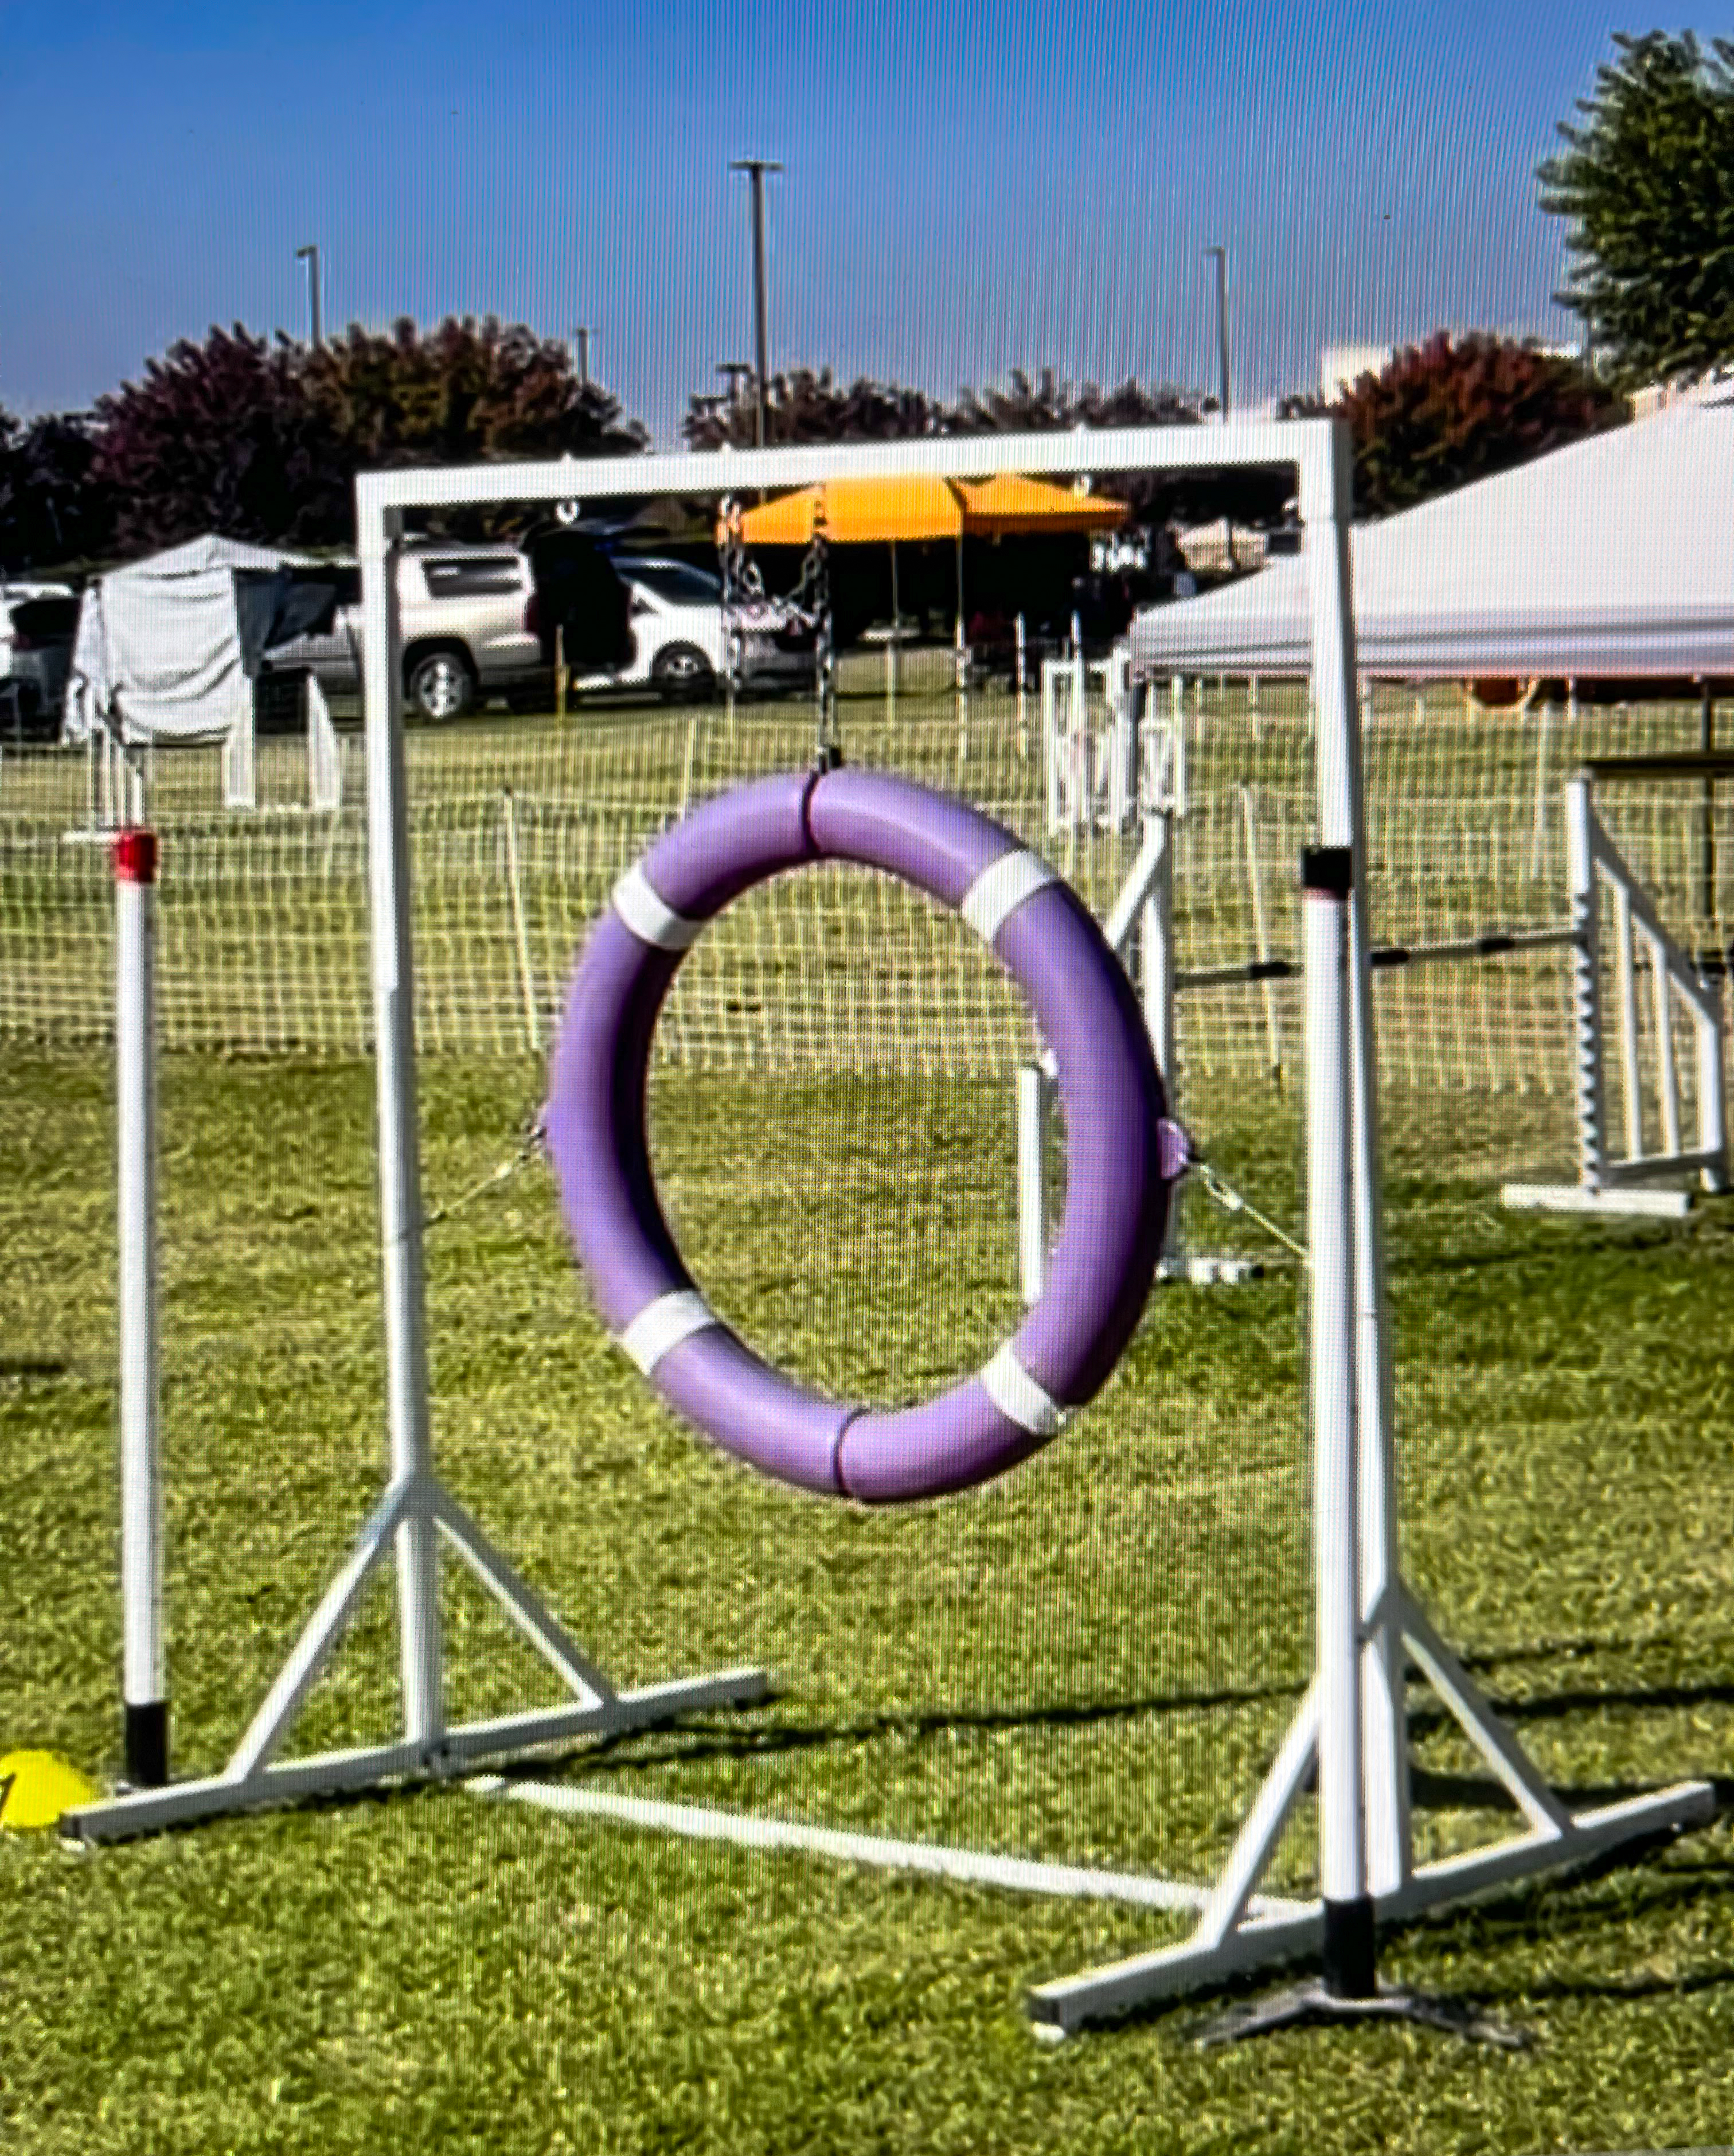 Agility field with tire jump in foreground.